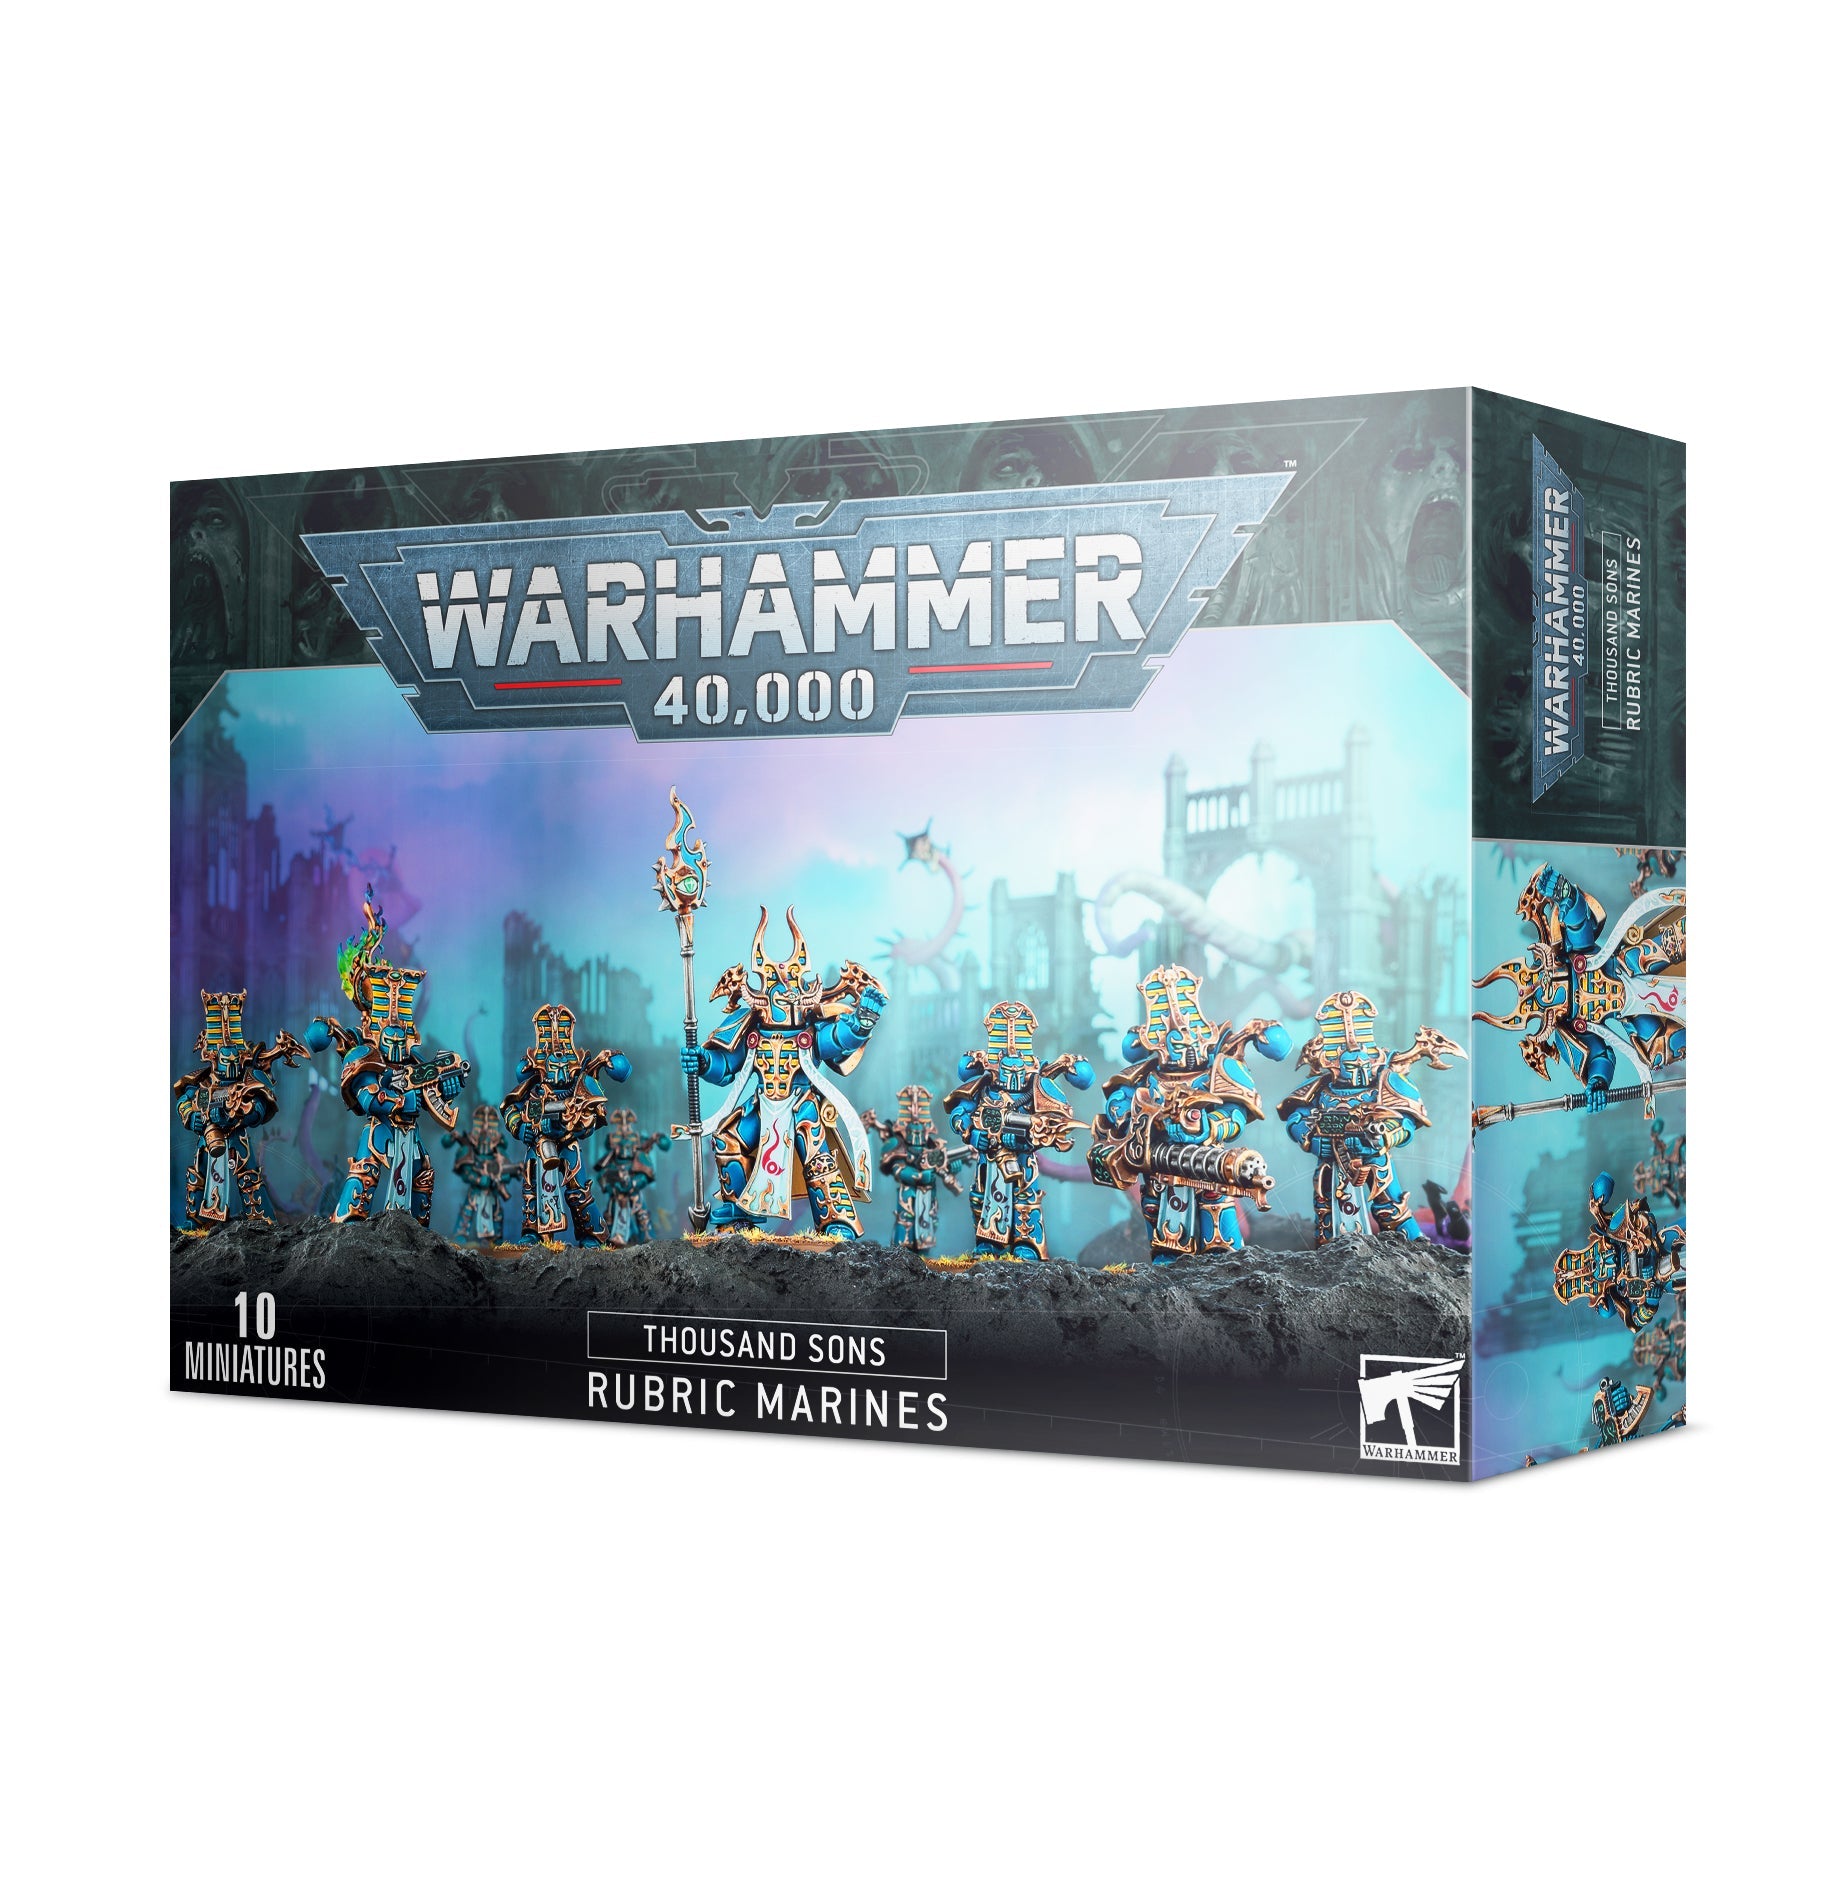 WH40K THOUSAND SONS RUBRIC MARINES | Impulse Games and Hobbies